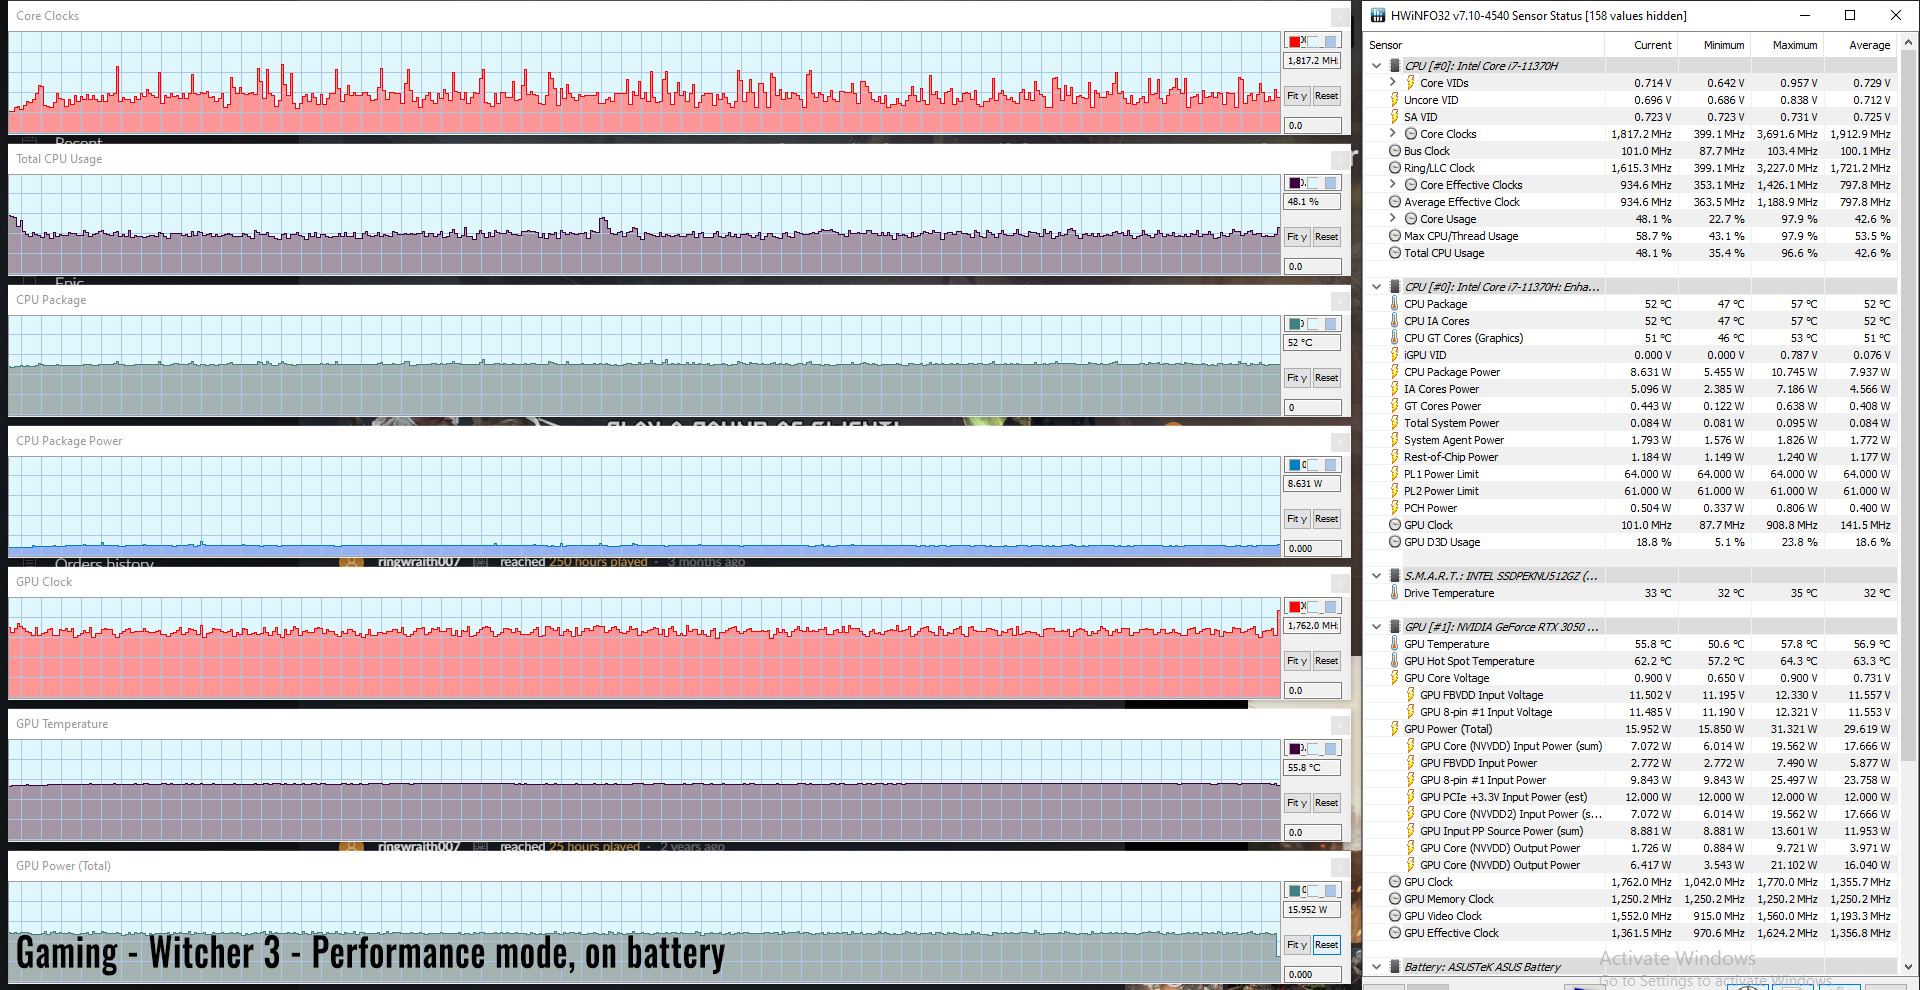 gaming witcher3 perf battery